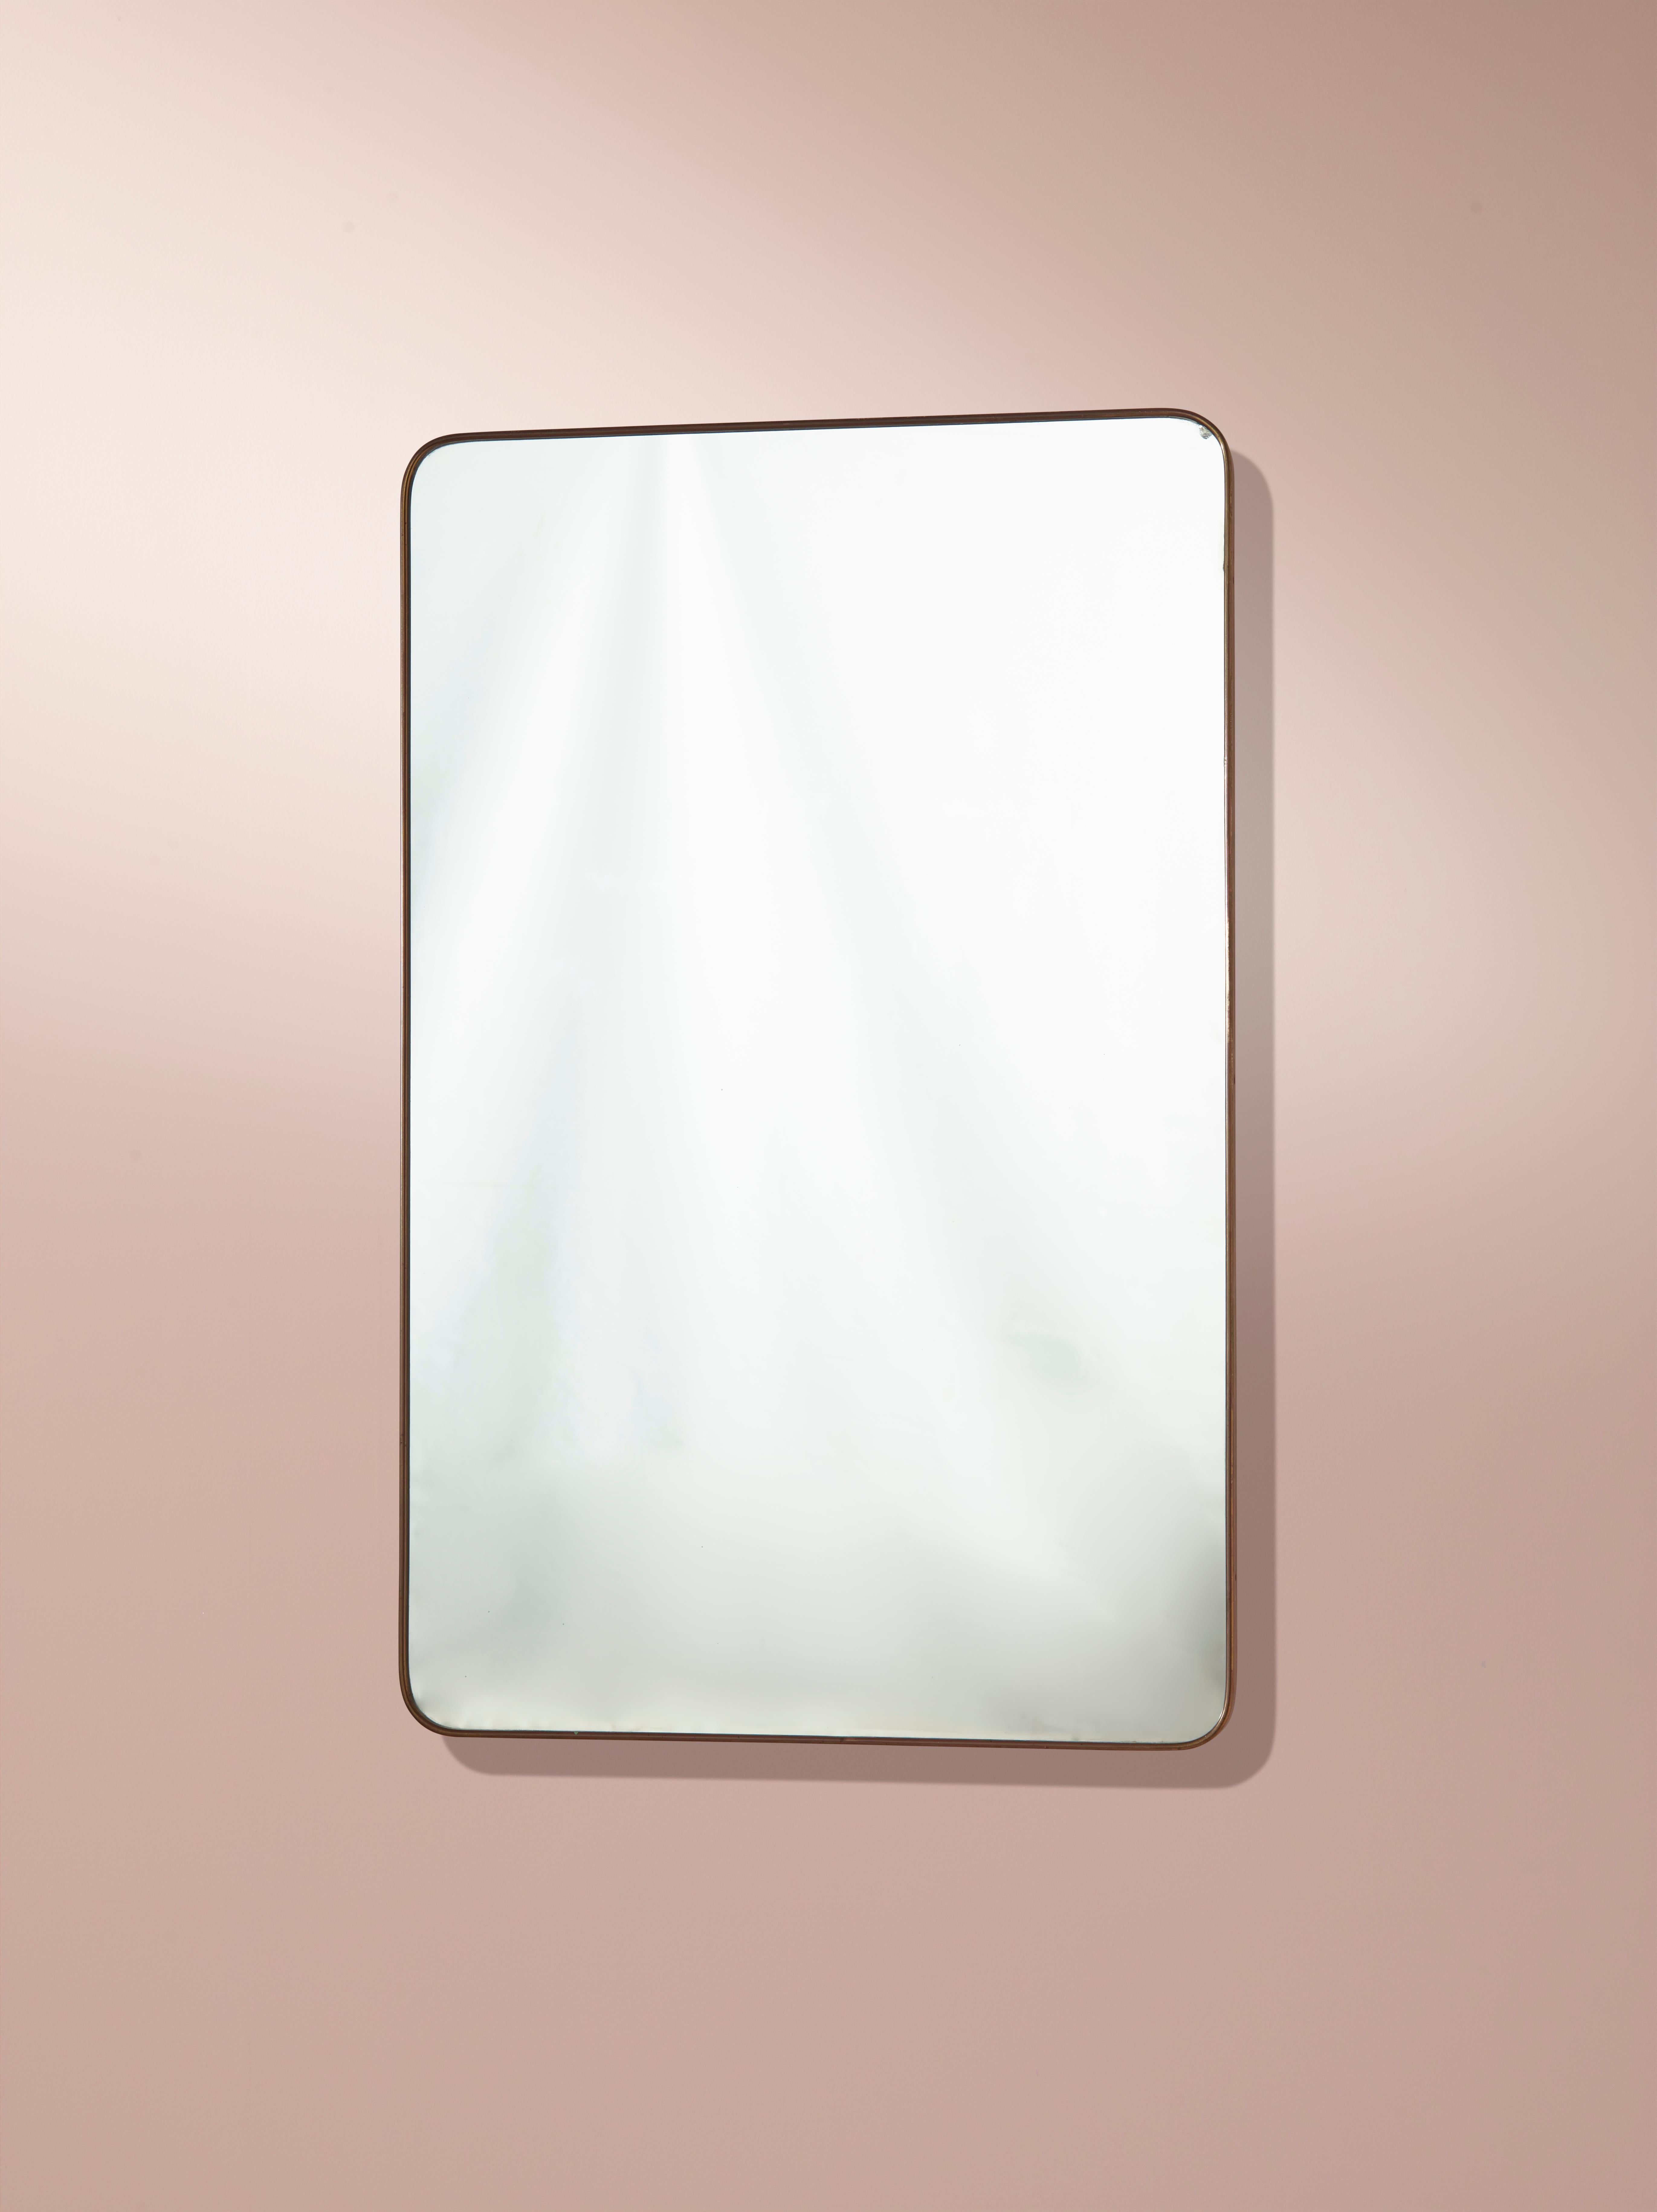 An Italian large brass wall mirror from the 1950s. With a rectangular shape, with a simple yet sophisticated design, it is a beautiful piece of Italian design from the 1950s.

The dimensions of the mirror are 111cm in height, 70.5cm in width, and